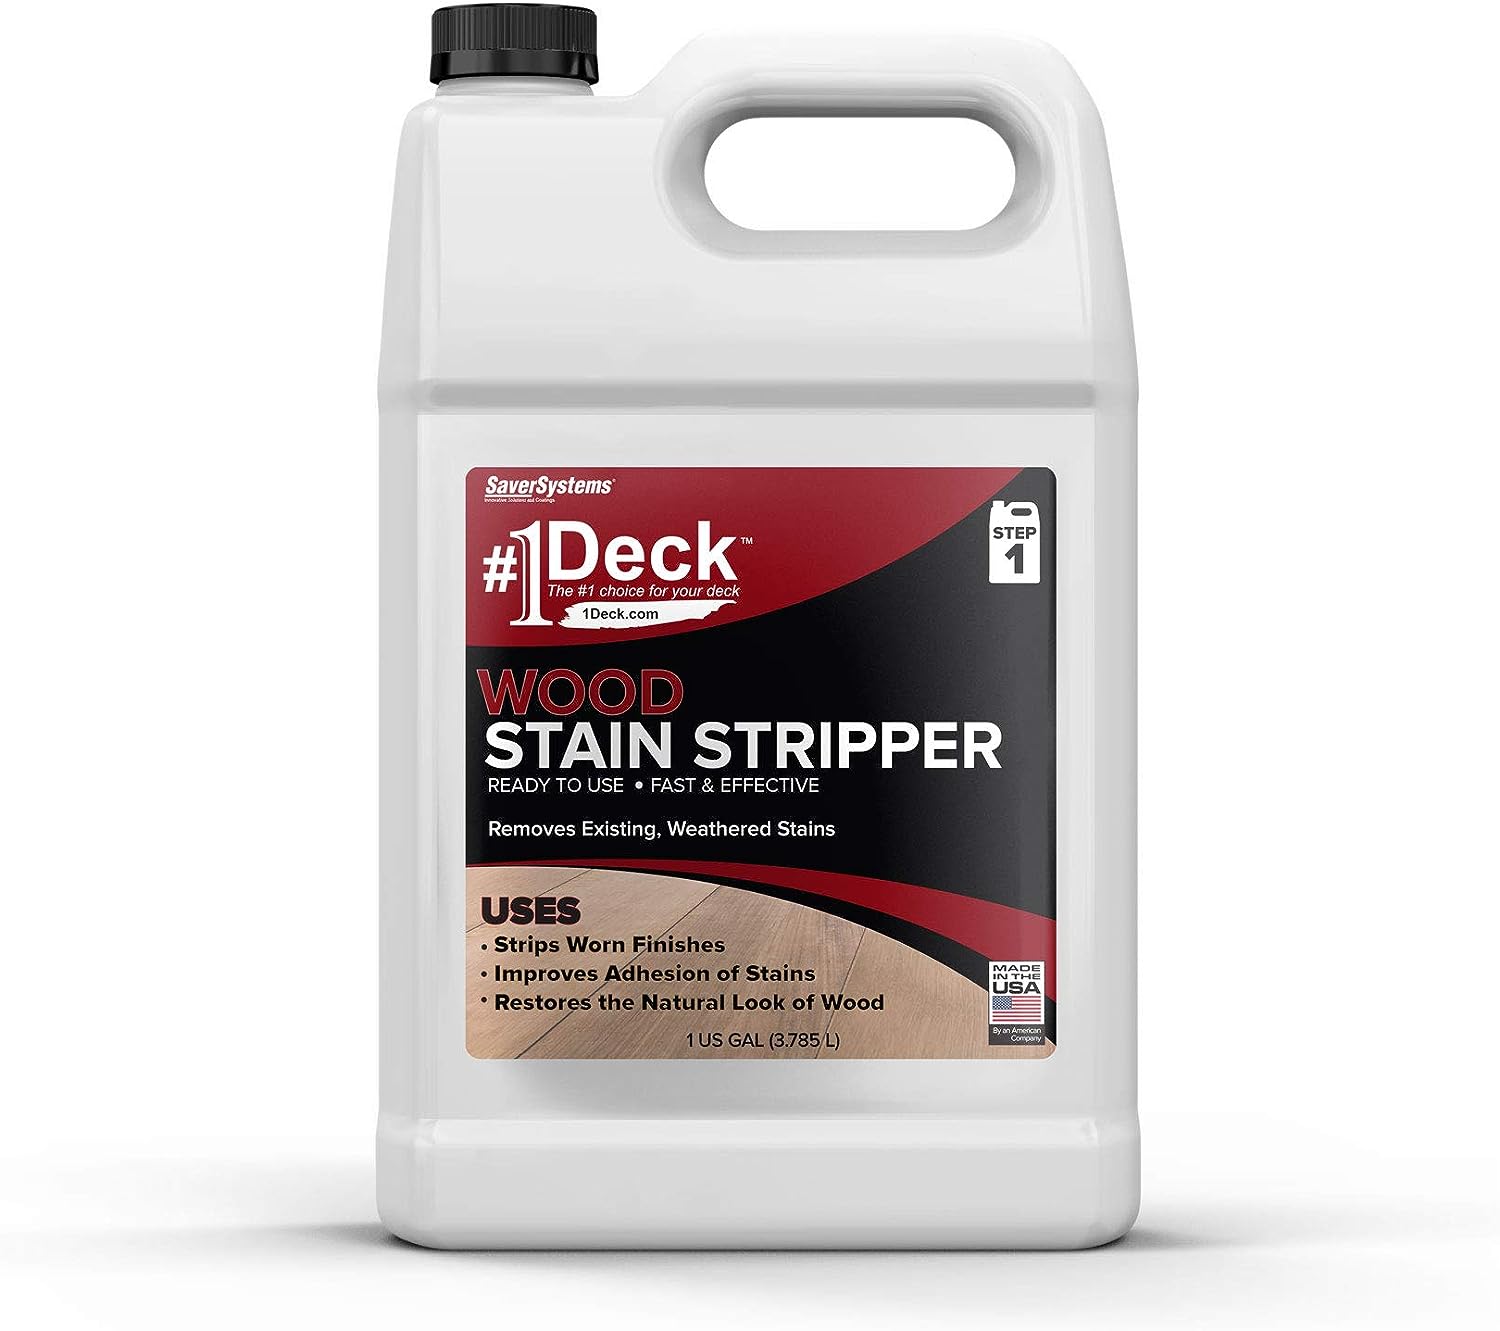 #1 Deck Wood Stain Stripper - 1 Gallon - Ready to Use, [...]